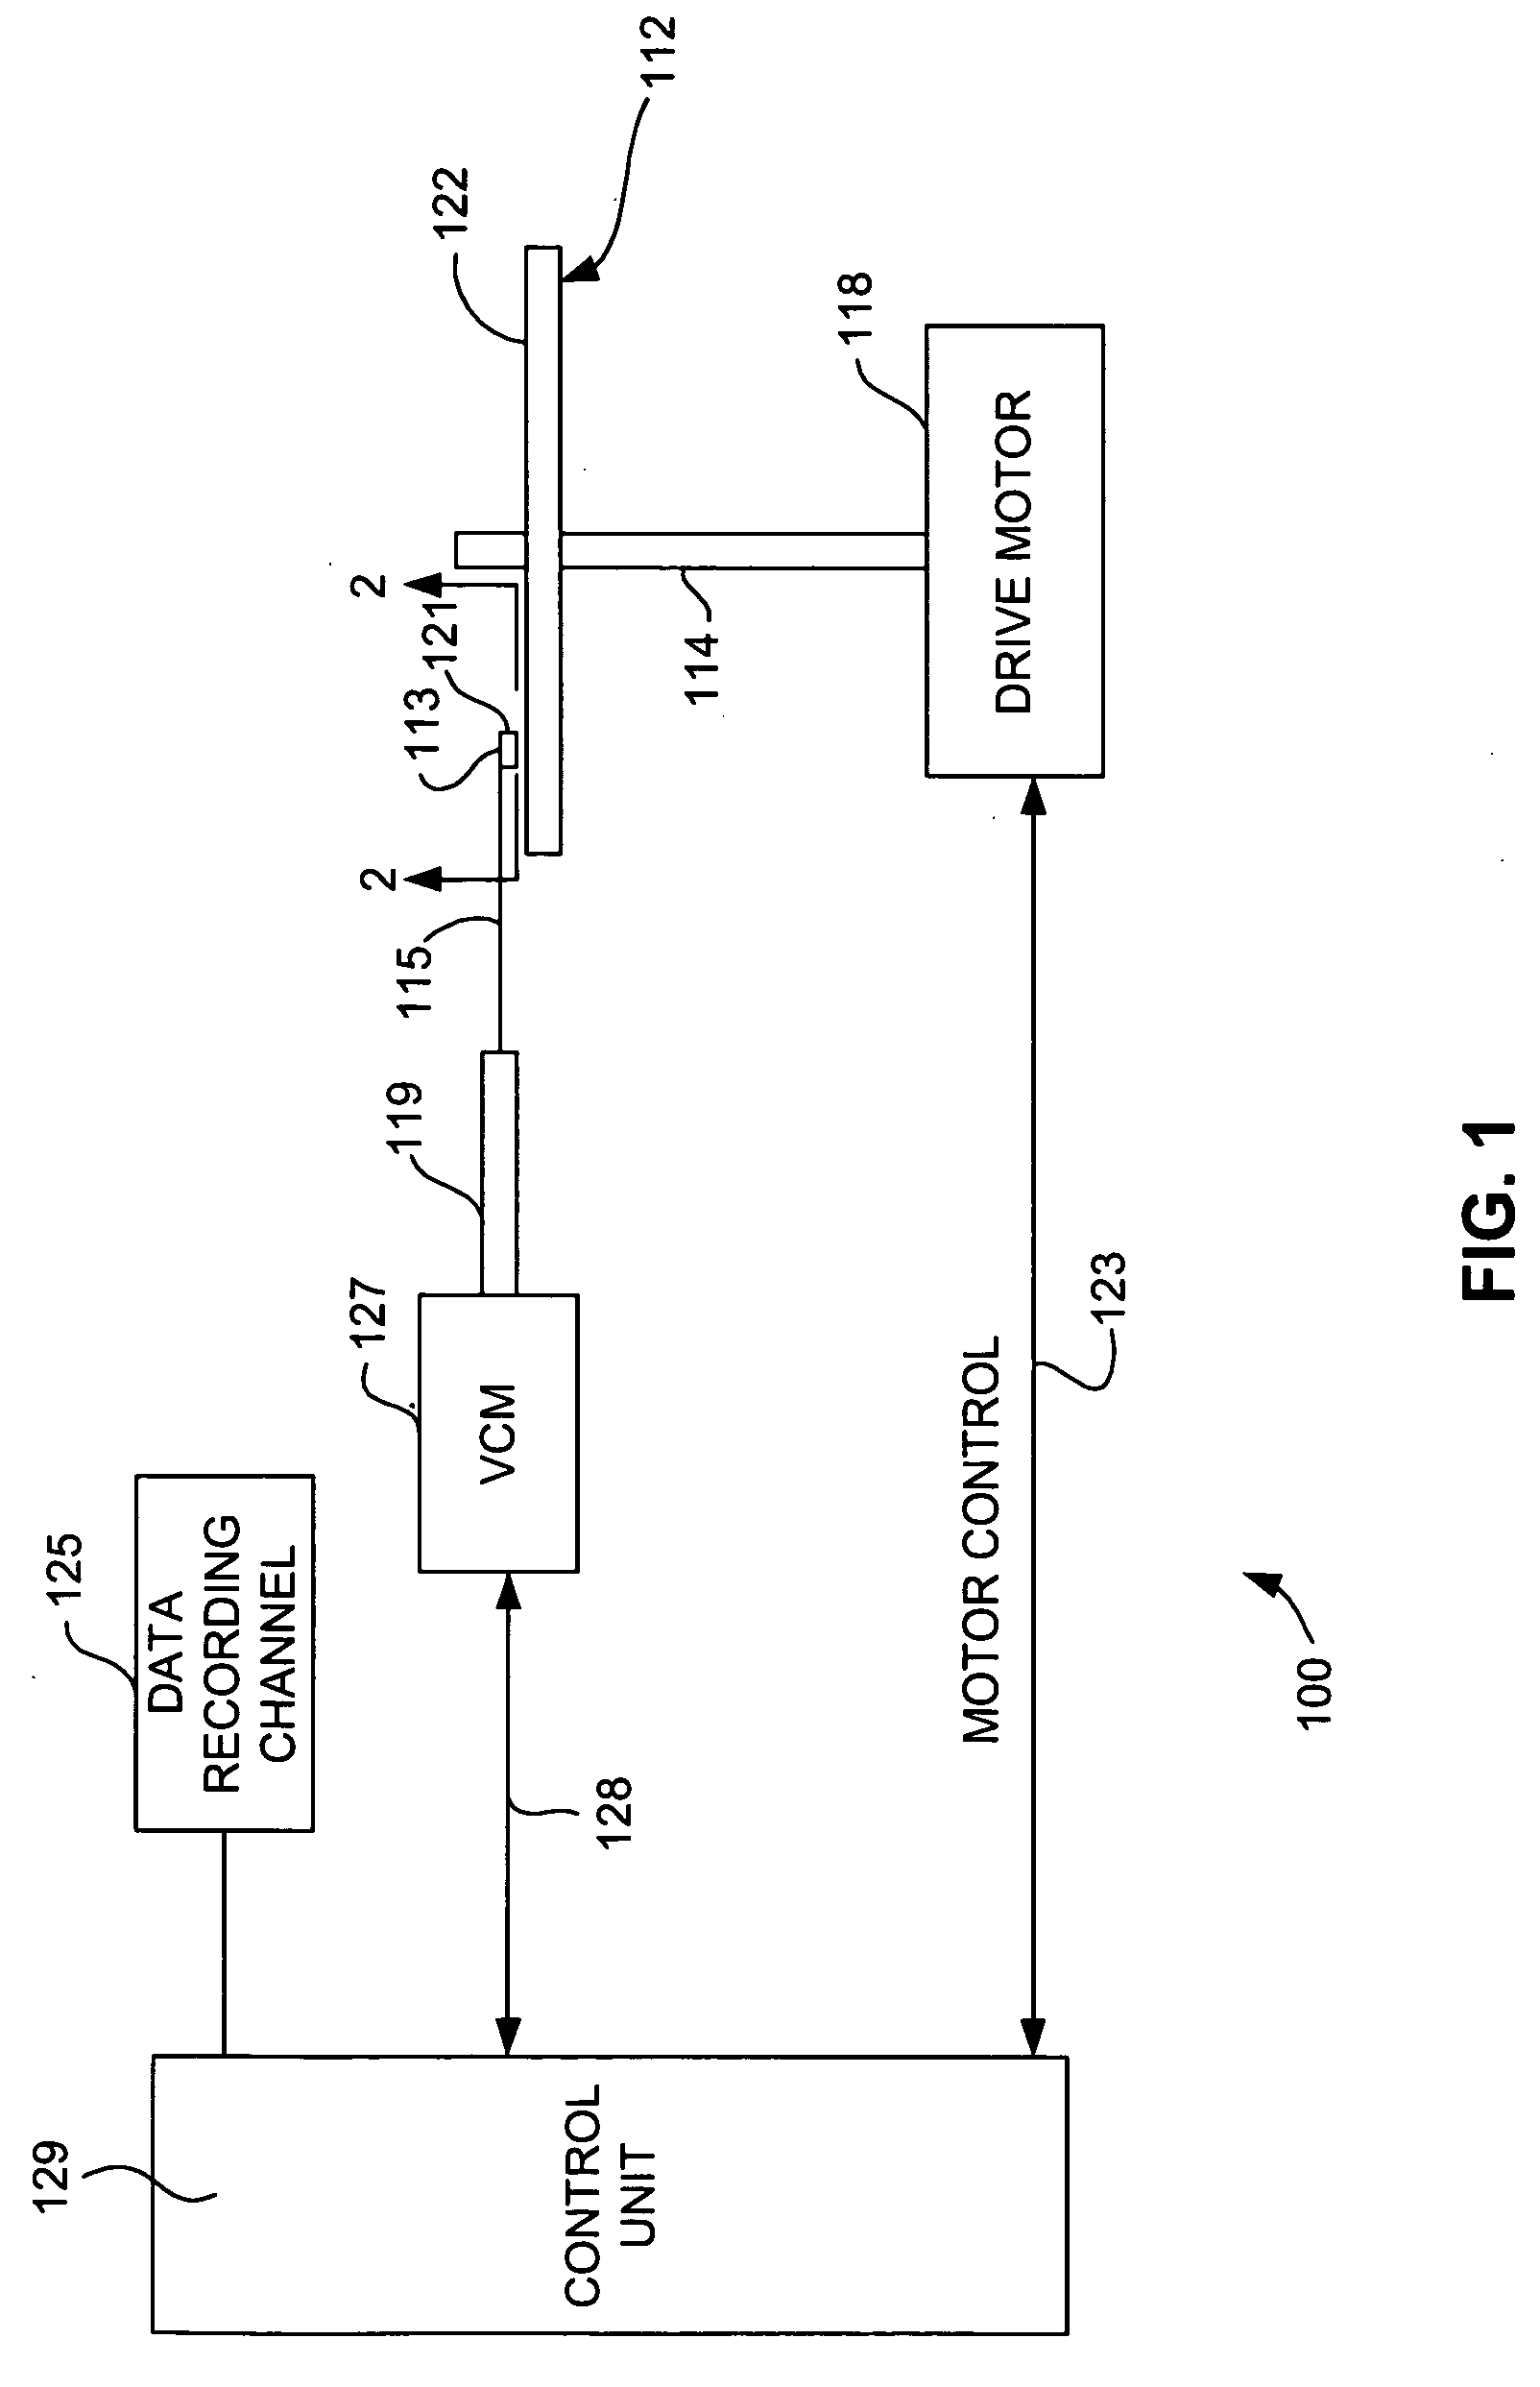 Double mill process for patterning current perpendicular to plane (CPP) magnetoresistive devices to minimize barrier shorting and barrier damage